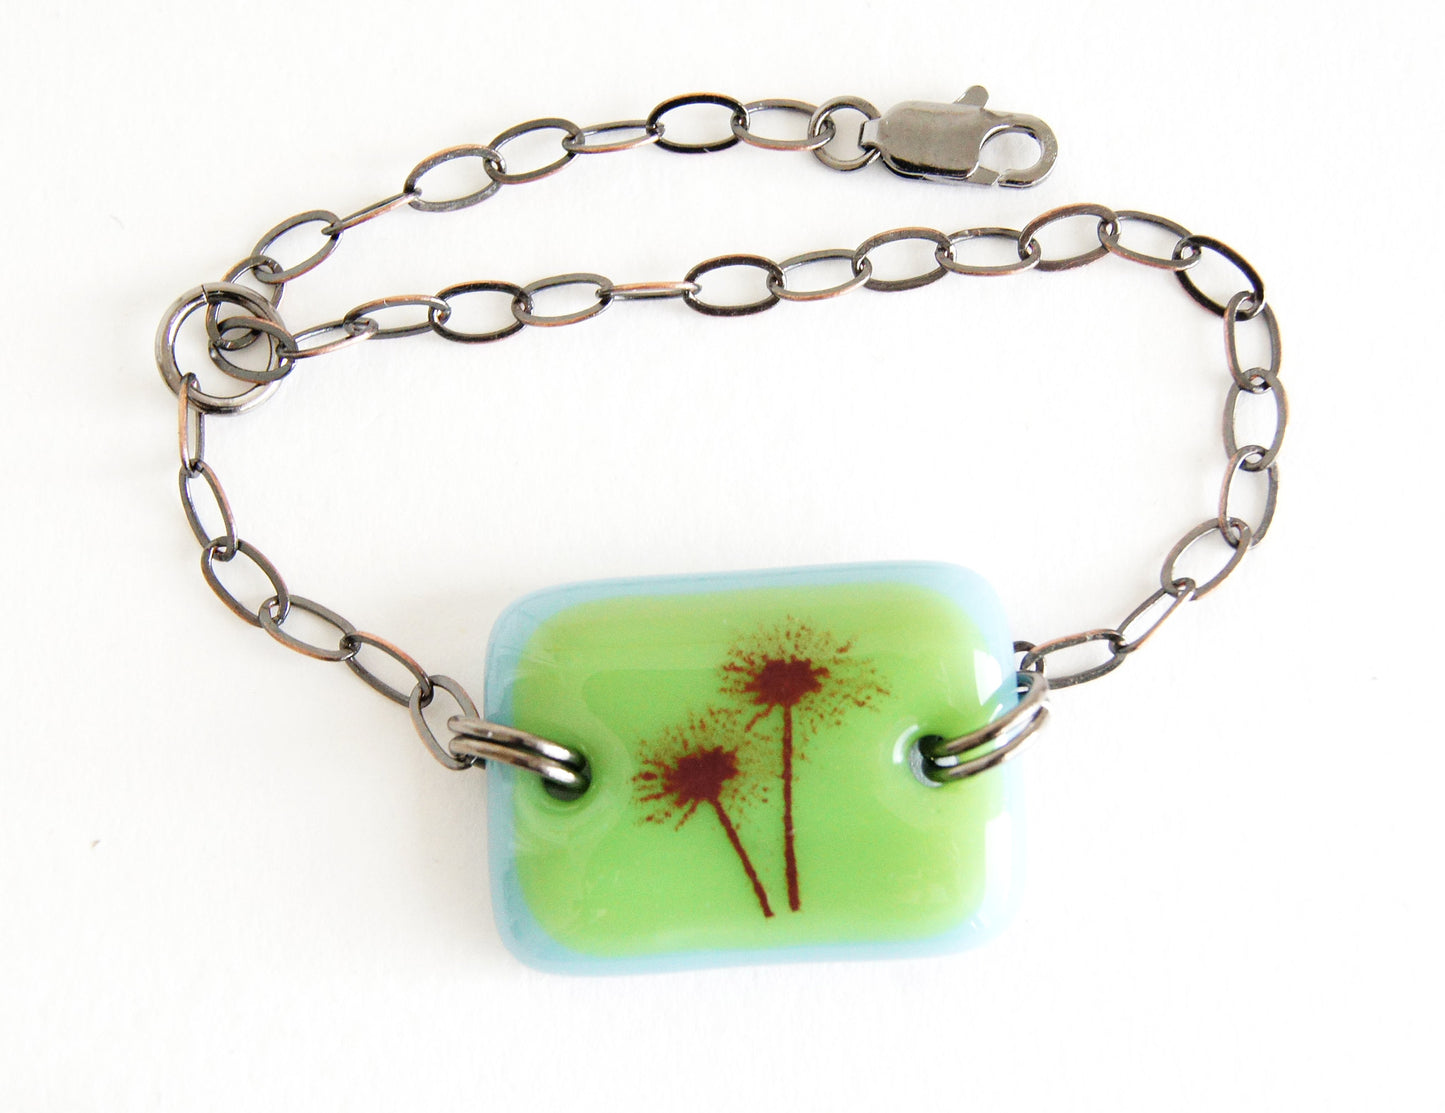 Adjustable chain and glass bracelet with echinacea flower image on green and blue glass. 